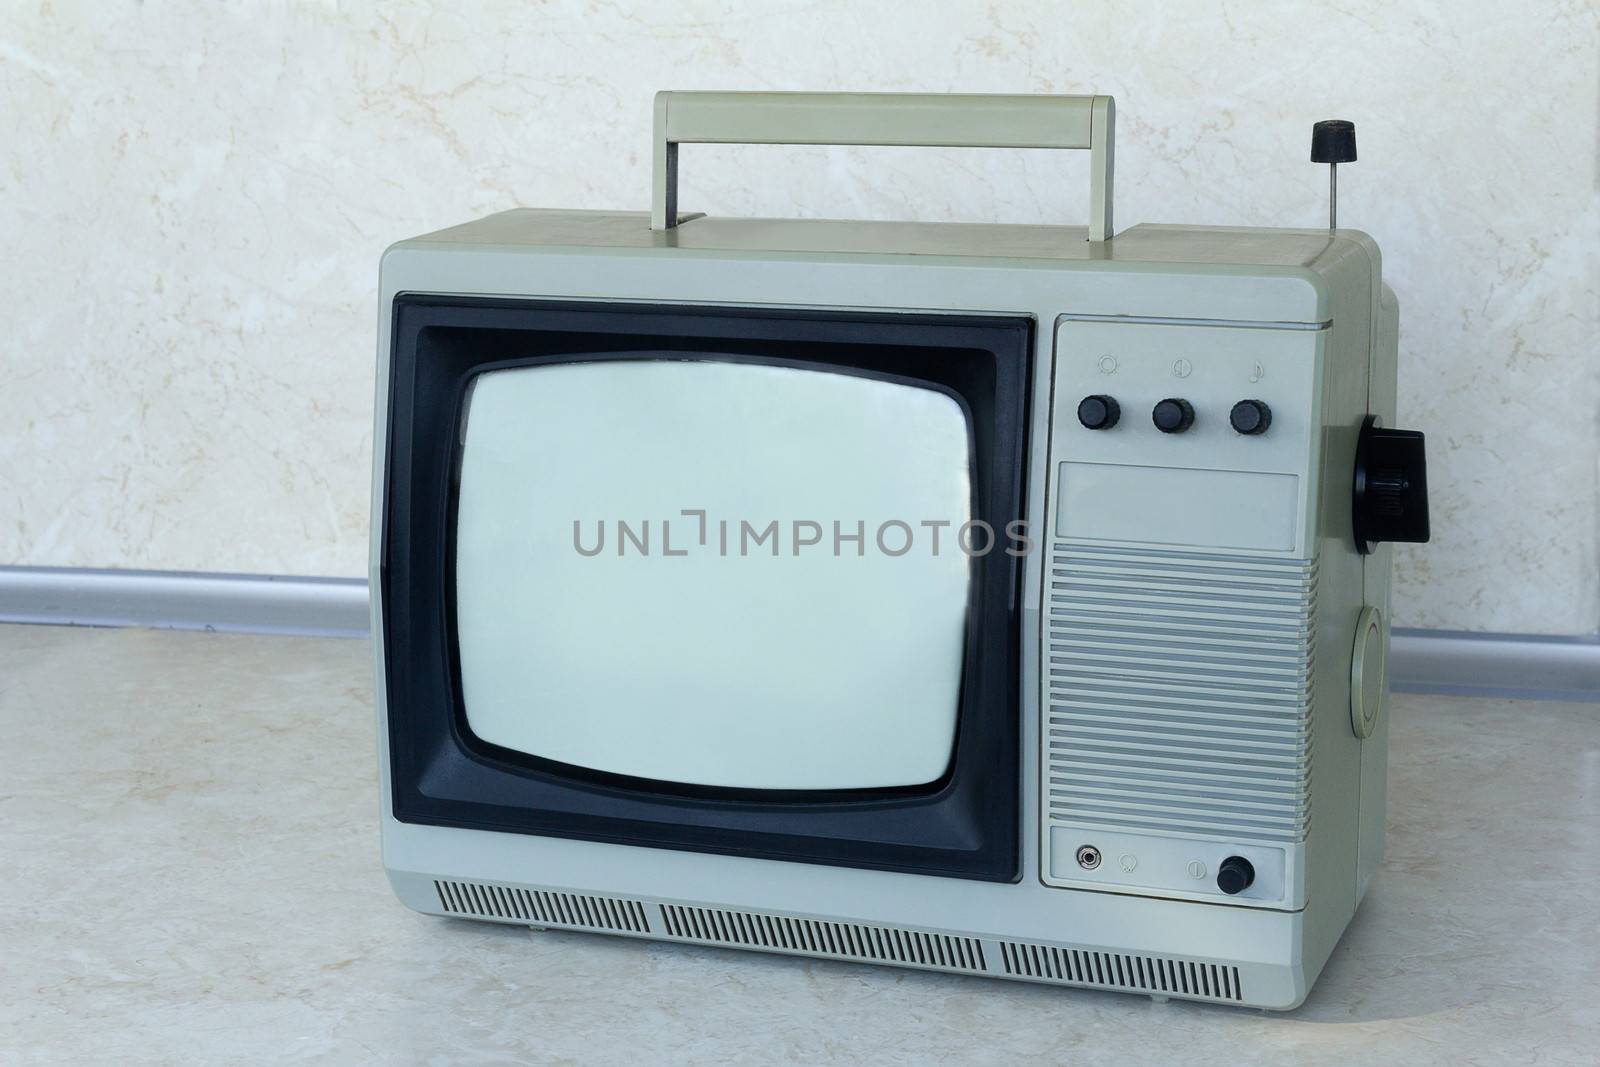 A small compact TV, outdated model by georgina198